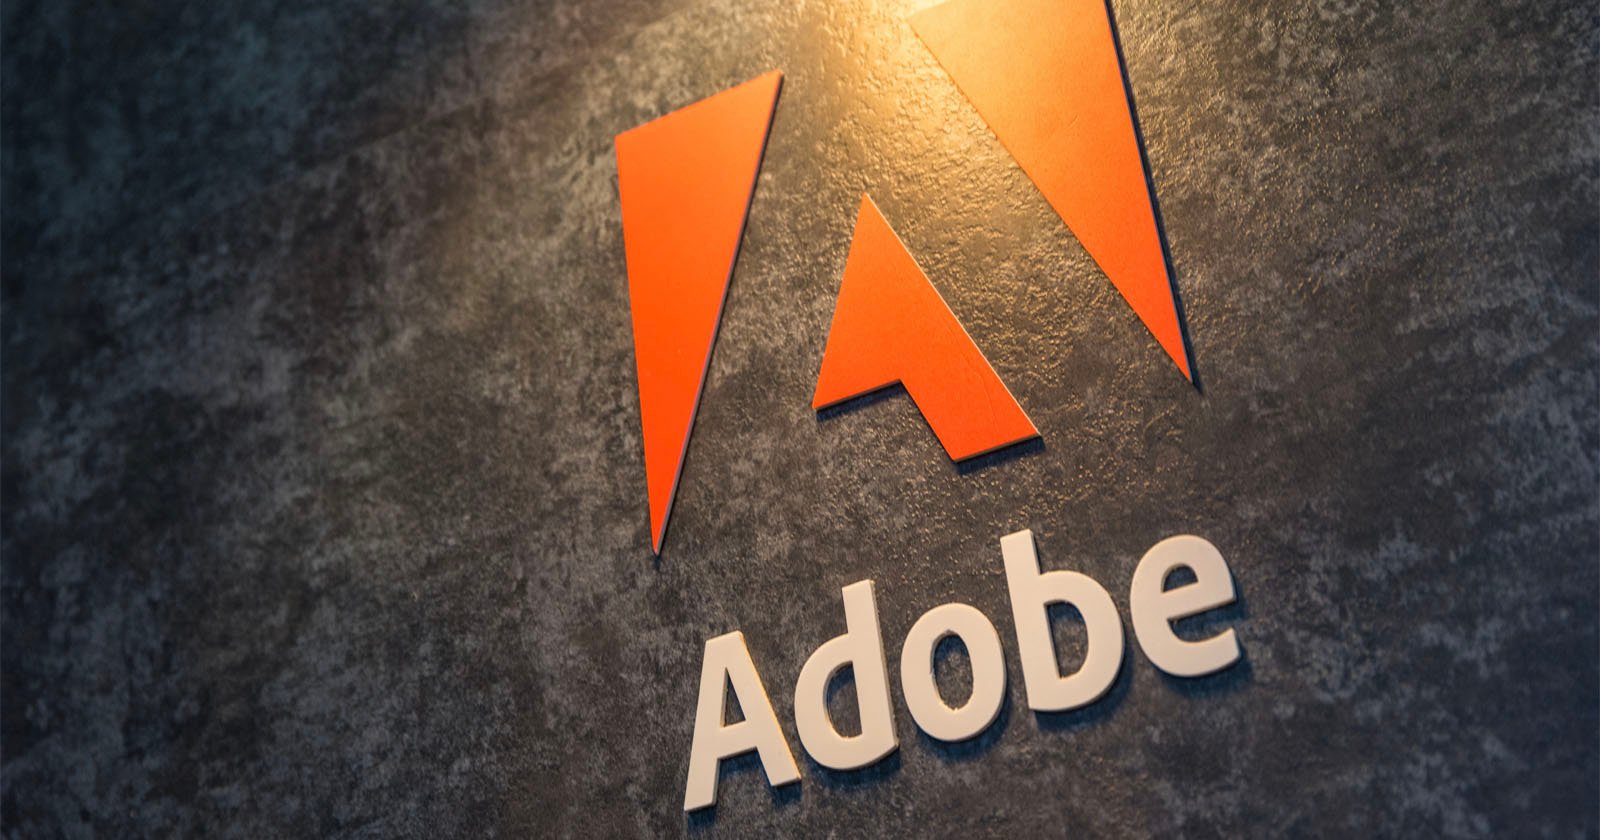 Close-up of the adobe logo with a stylized a in orange above the word adobe in white, affixed to a textured dark gray wall.